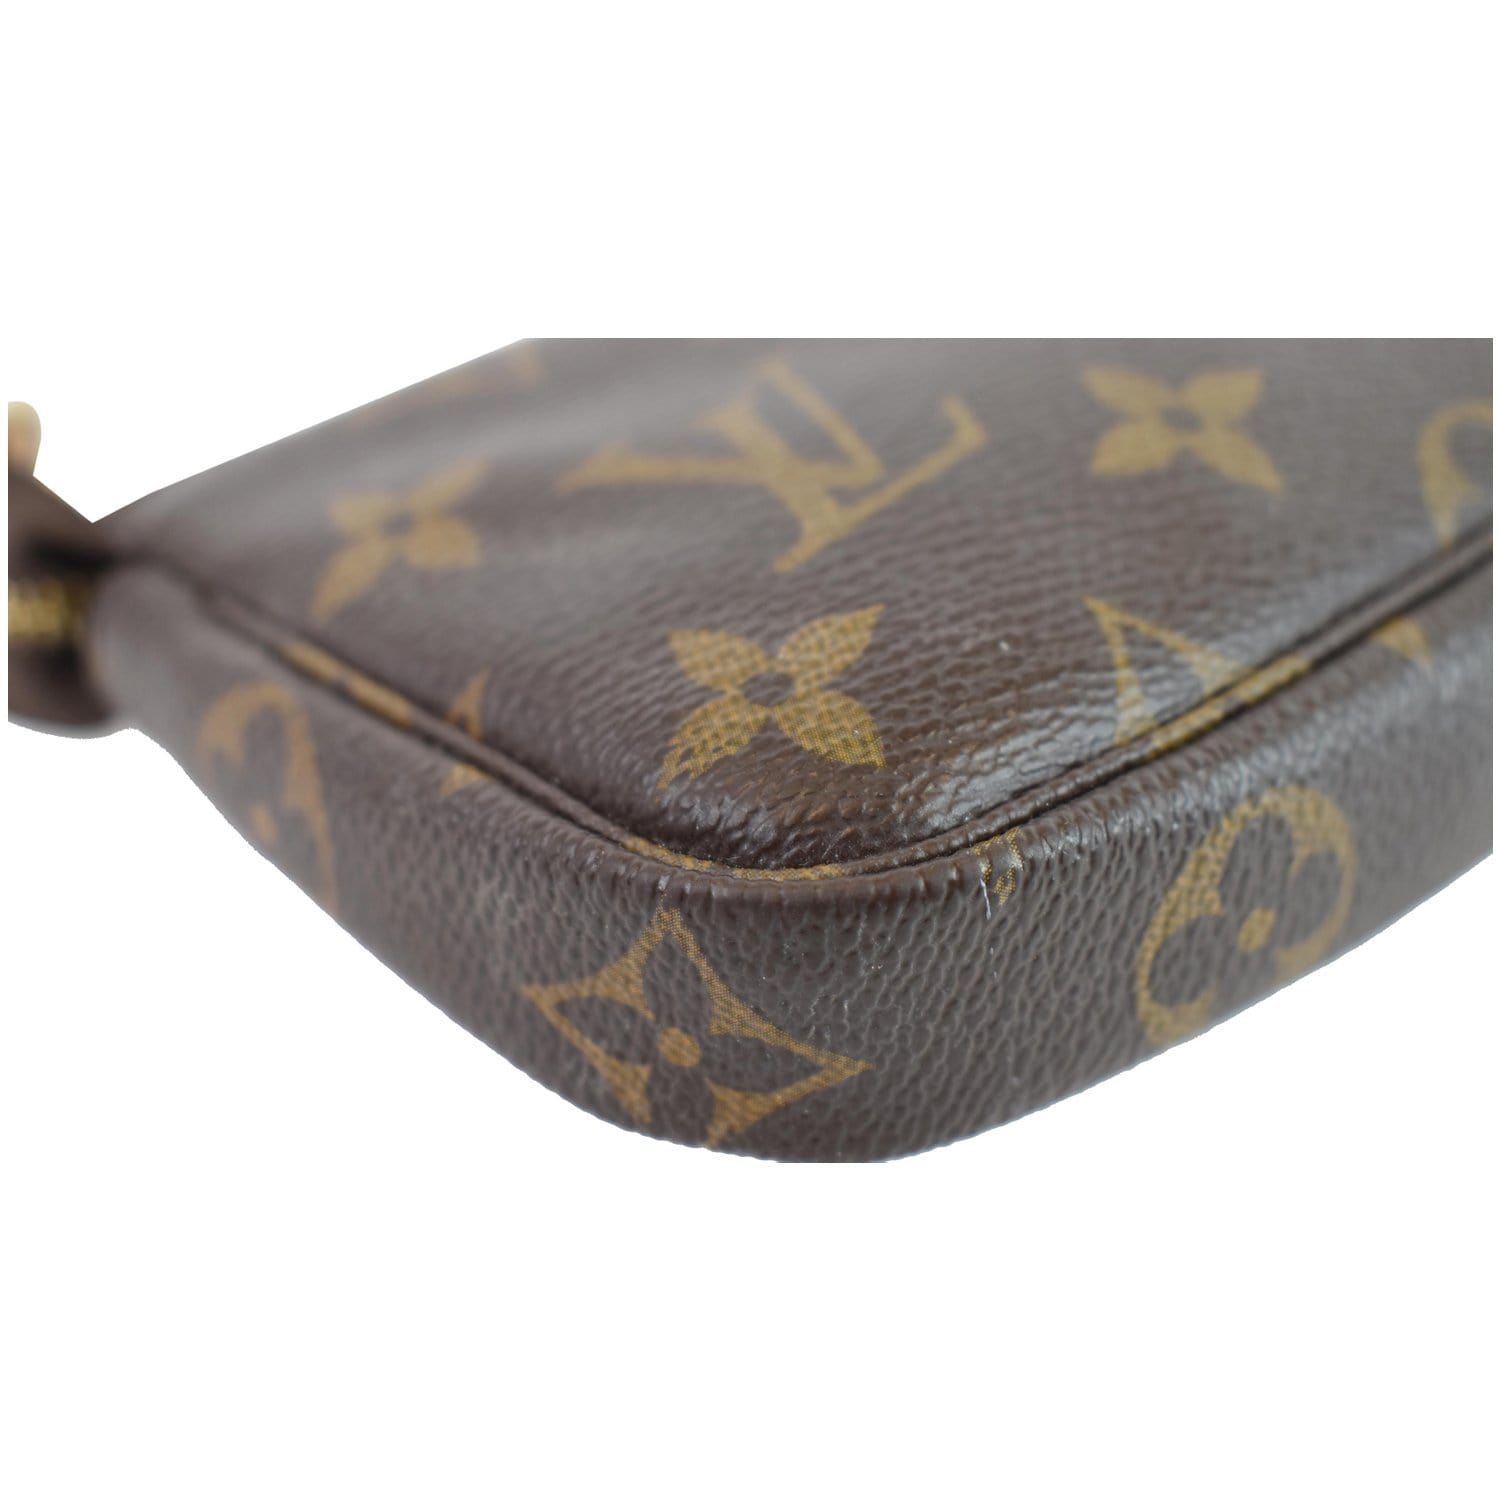 Mini Pochette Accessoires Monogram Canvas - Wallets and Small Leather Goods  M58009